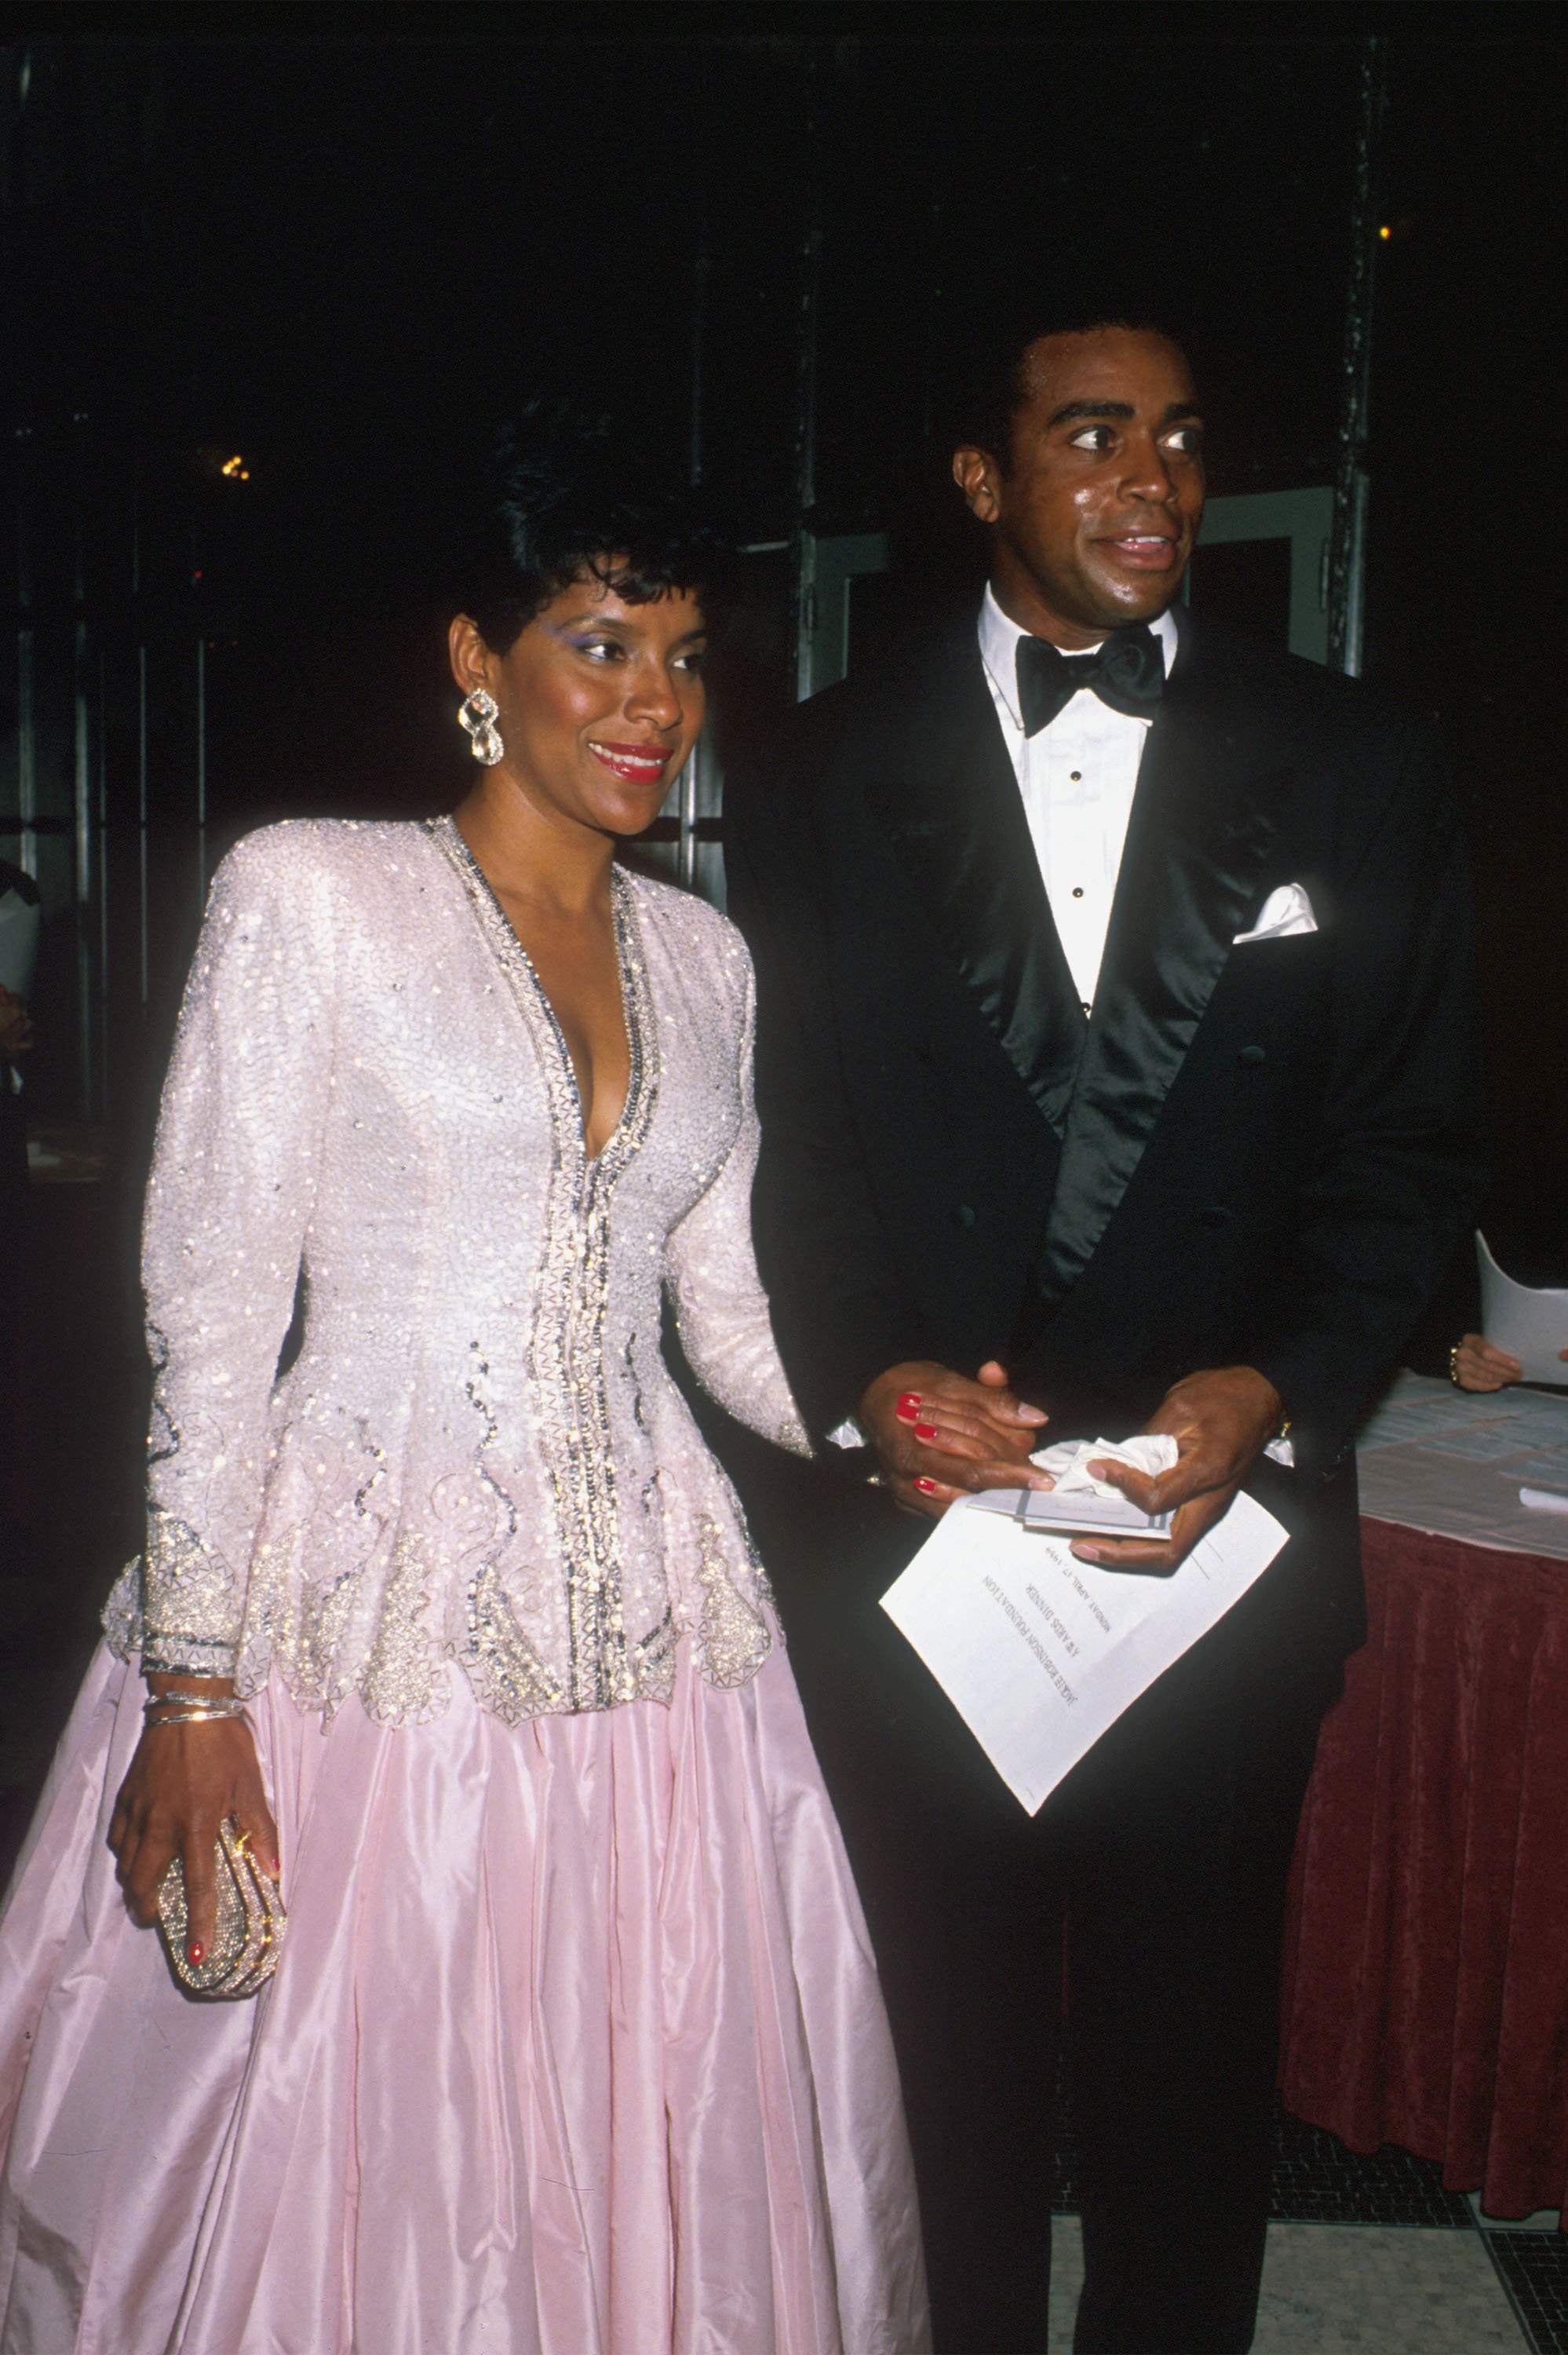 Phylicia Rashad and Ahmad Rashad arrive at an event in New York City, April 15, 1989. | Photo: GettyImages